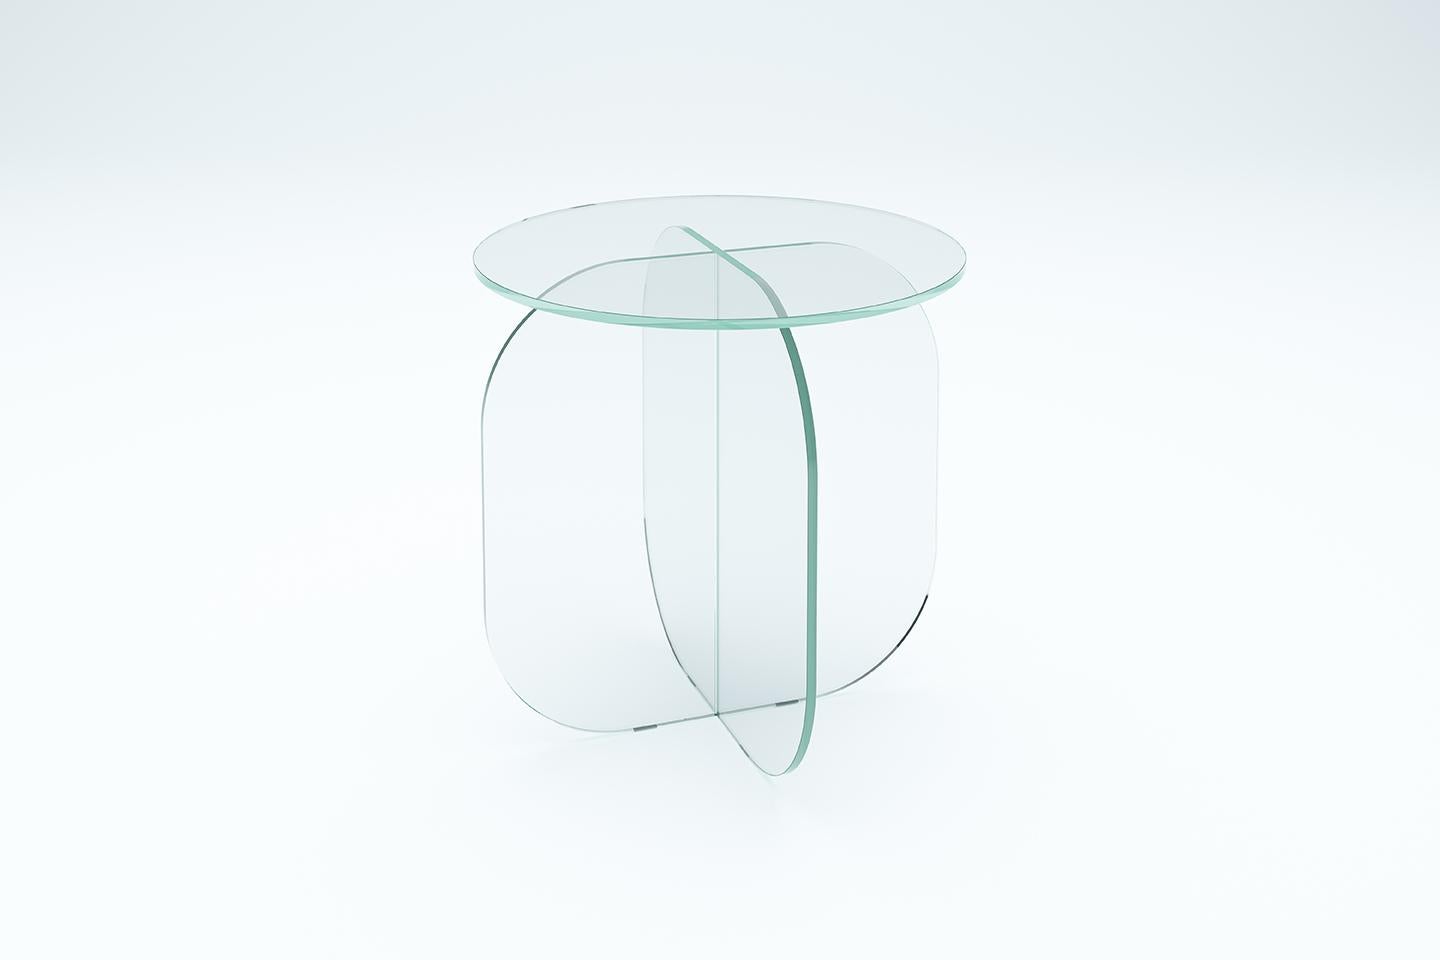 Nor side table, Sebastian Scherer
Dimensions: ø 45 x 45 cm
Materials: Clear glass


The NEO/CRAFT label was founded by the Berlin-based designer Sebastian Scherer after he won the Lexus Design Award 2014 for his Iris lamp (2013). The debut